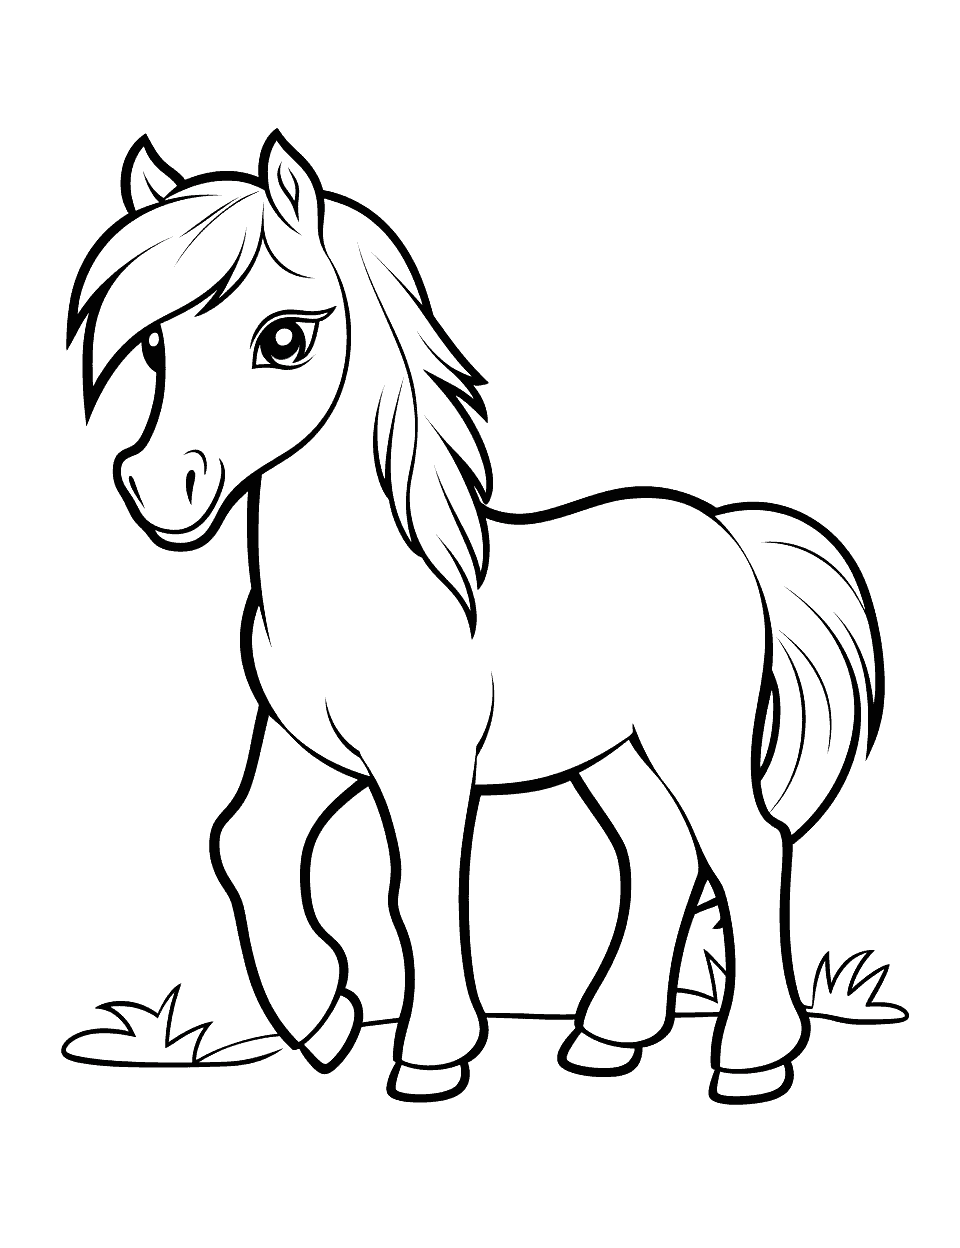 Easy Pony Outline Horse Coloring Page - A simple and easy outline of a pony, perfect for young children.